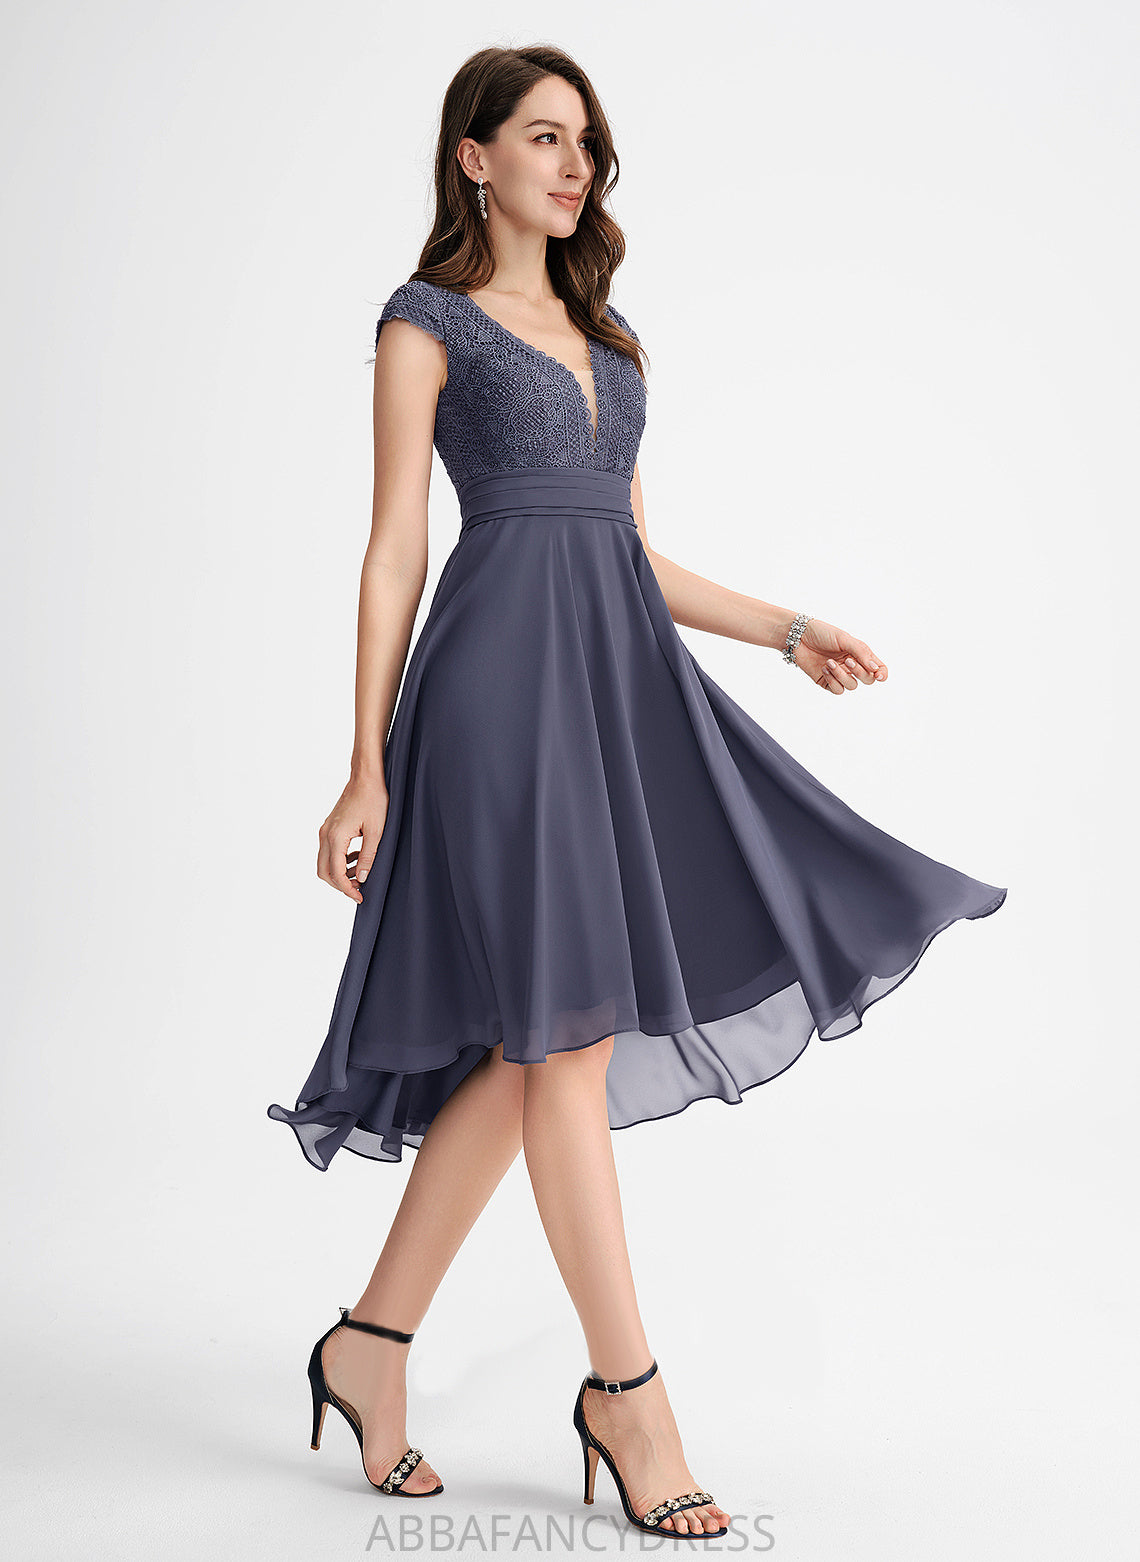 Cocktail Dresses Lace A-Line Chiffon Asymmetrical Pleated With Nevaeh Dress Cocktail V-neck